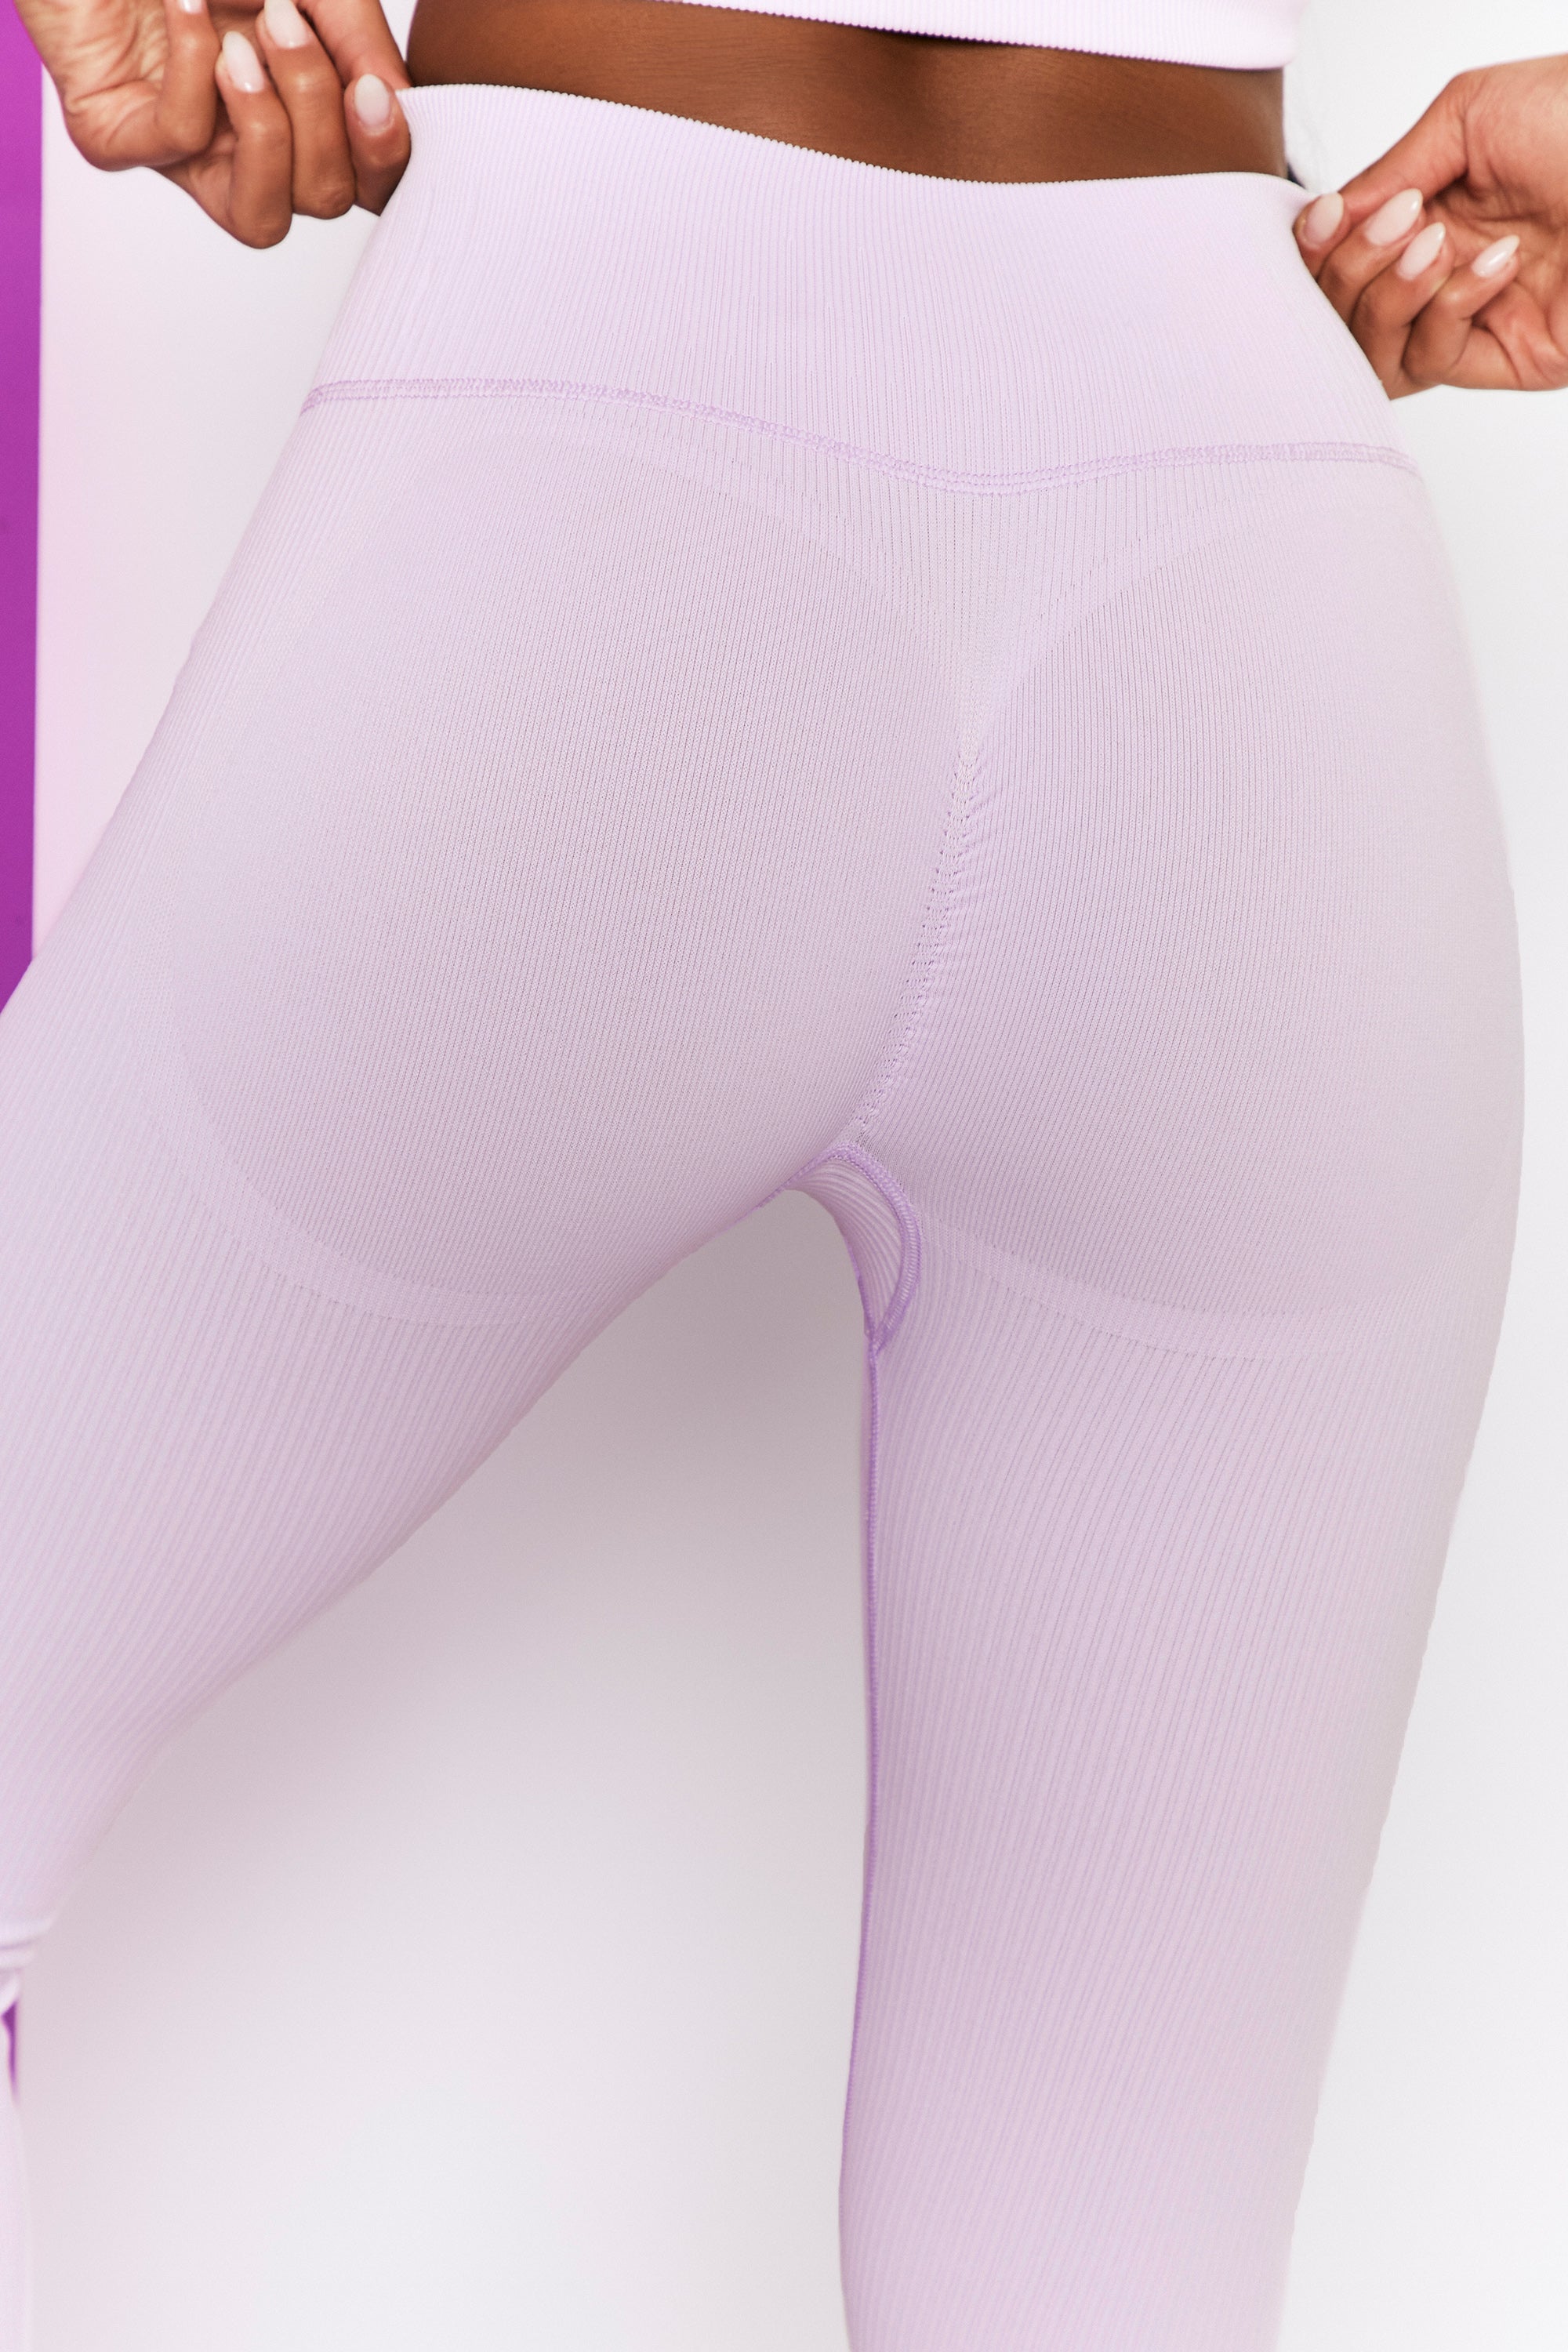 Buy Lilac Purple Ribbed Stretch Top & Leggings Set (7-16yrs) from Next